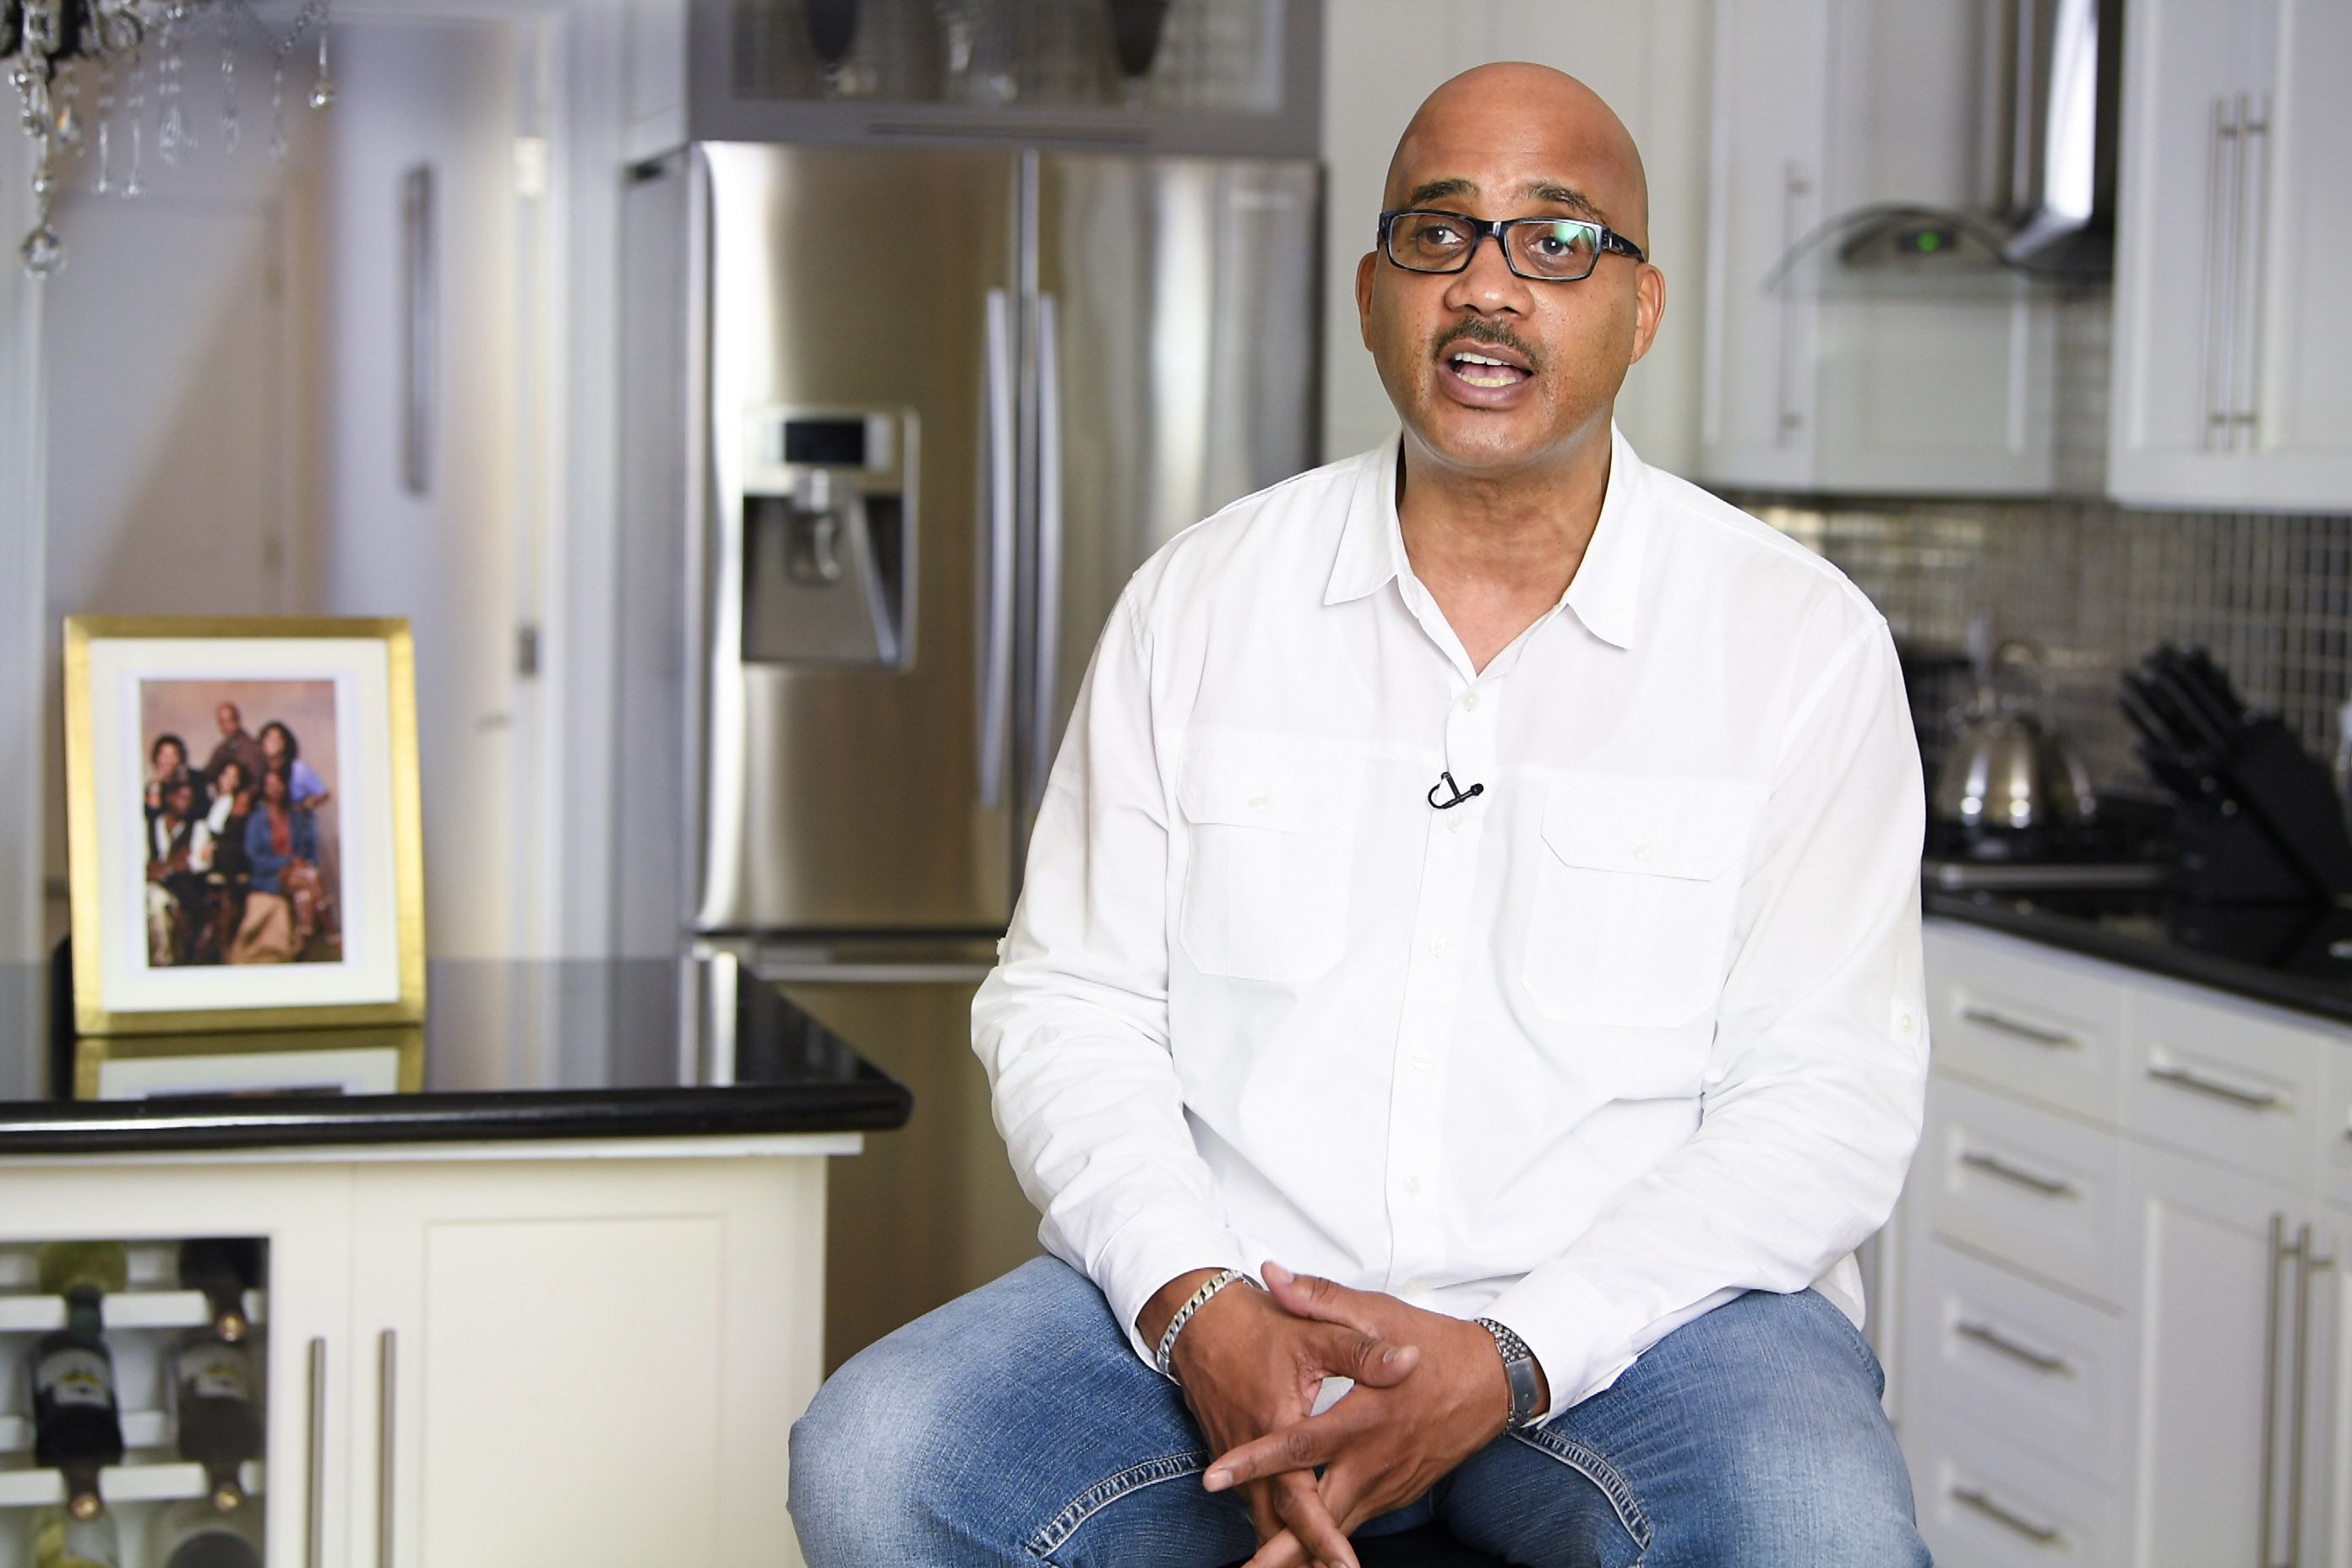 John Henton in an interview in celebration of "Living Single" 25th anniversary in 2018 in Los Angeles | Source: Getty Images